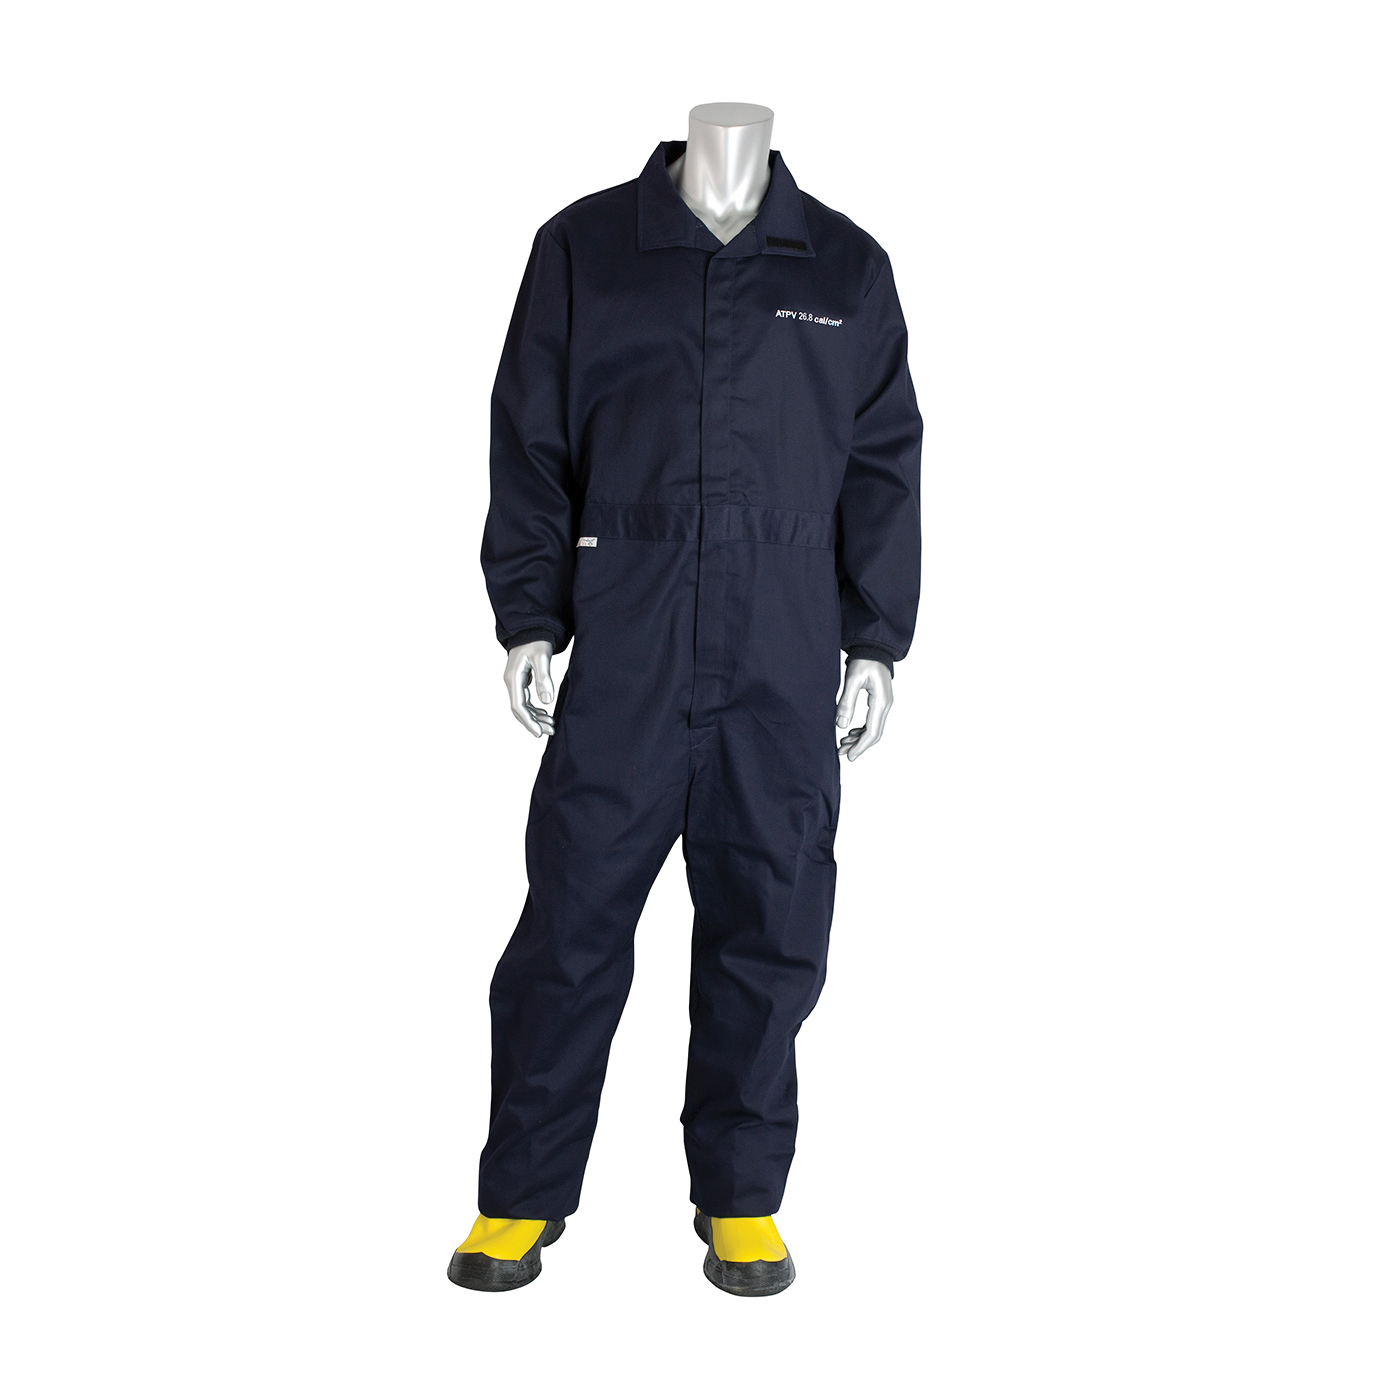 PIP® 9100-52772/2XL Flame Resistant Coverall, 2XL, Navy, Westex® Ultra Soft®/88% Cotton/12% Nylon, 52 to 54 in Chest, 32 in L Inseam